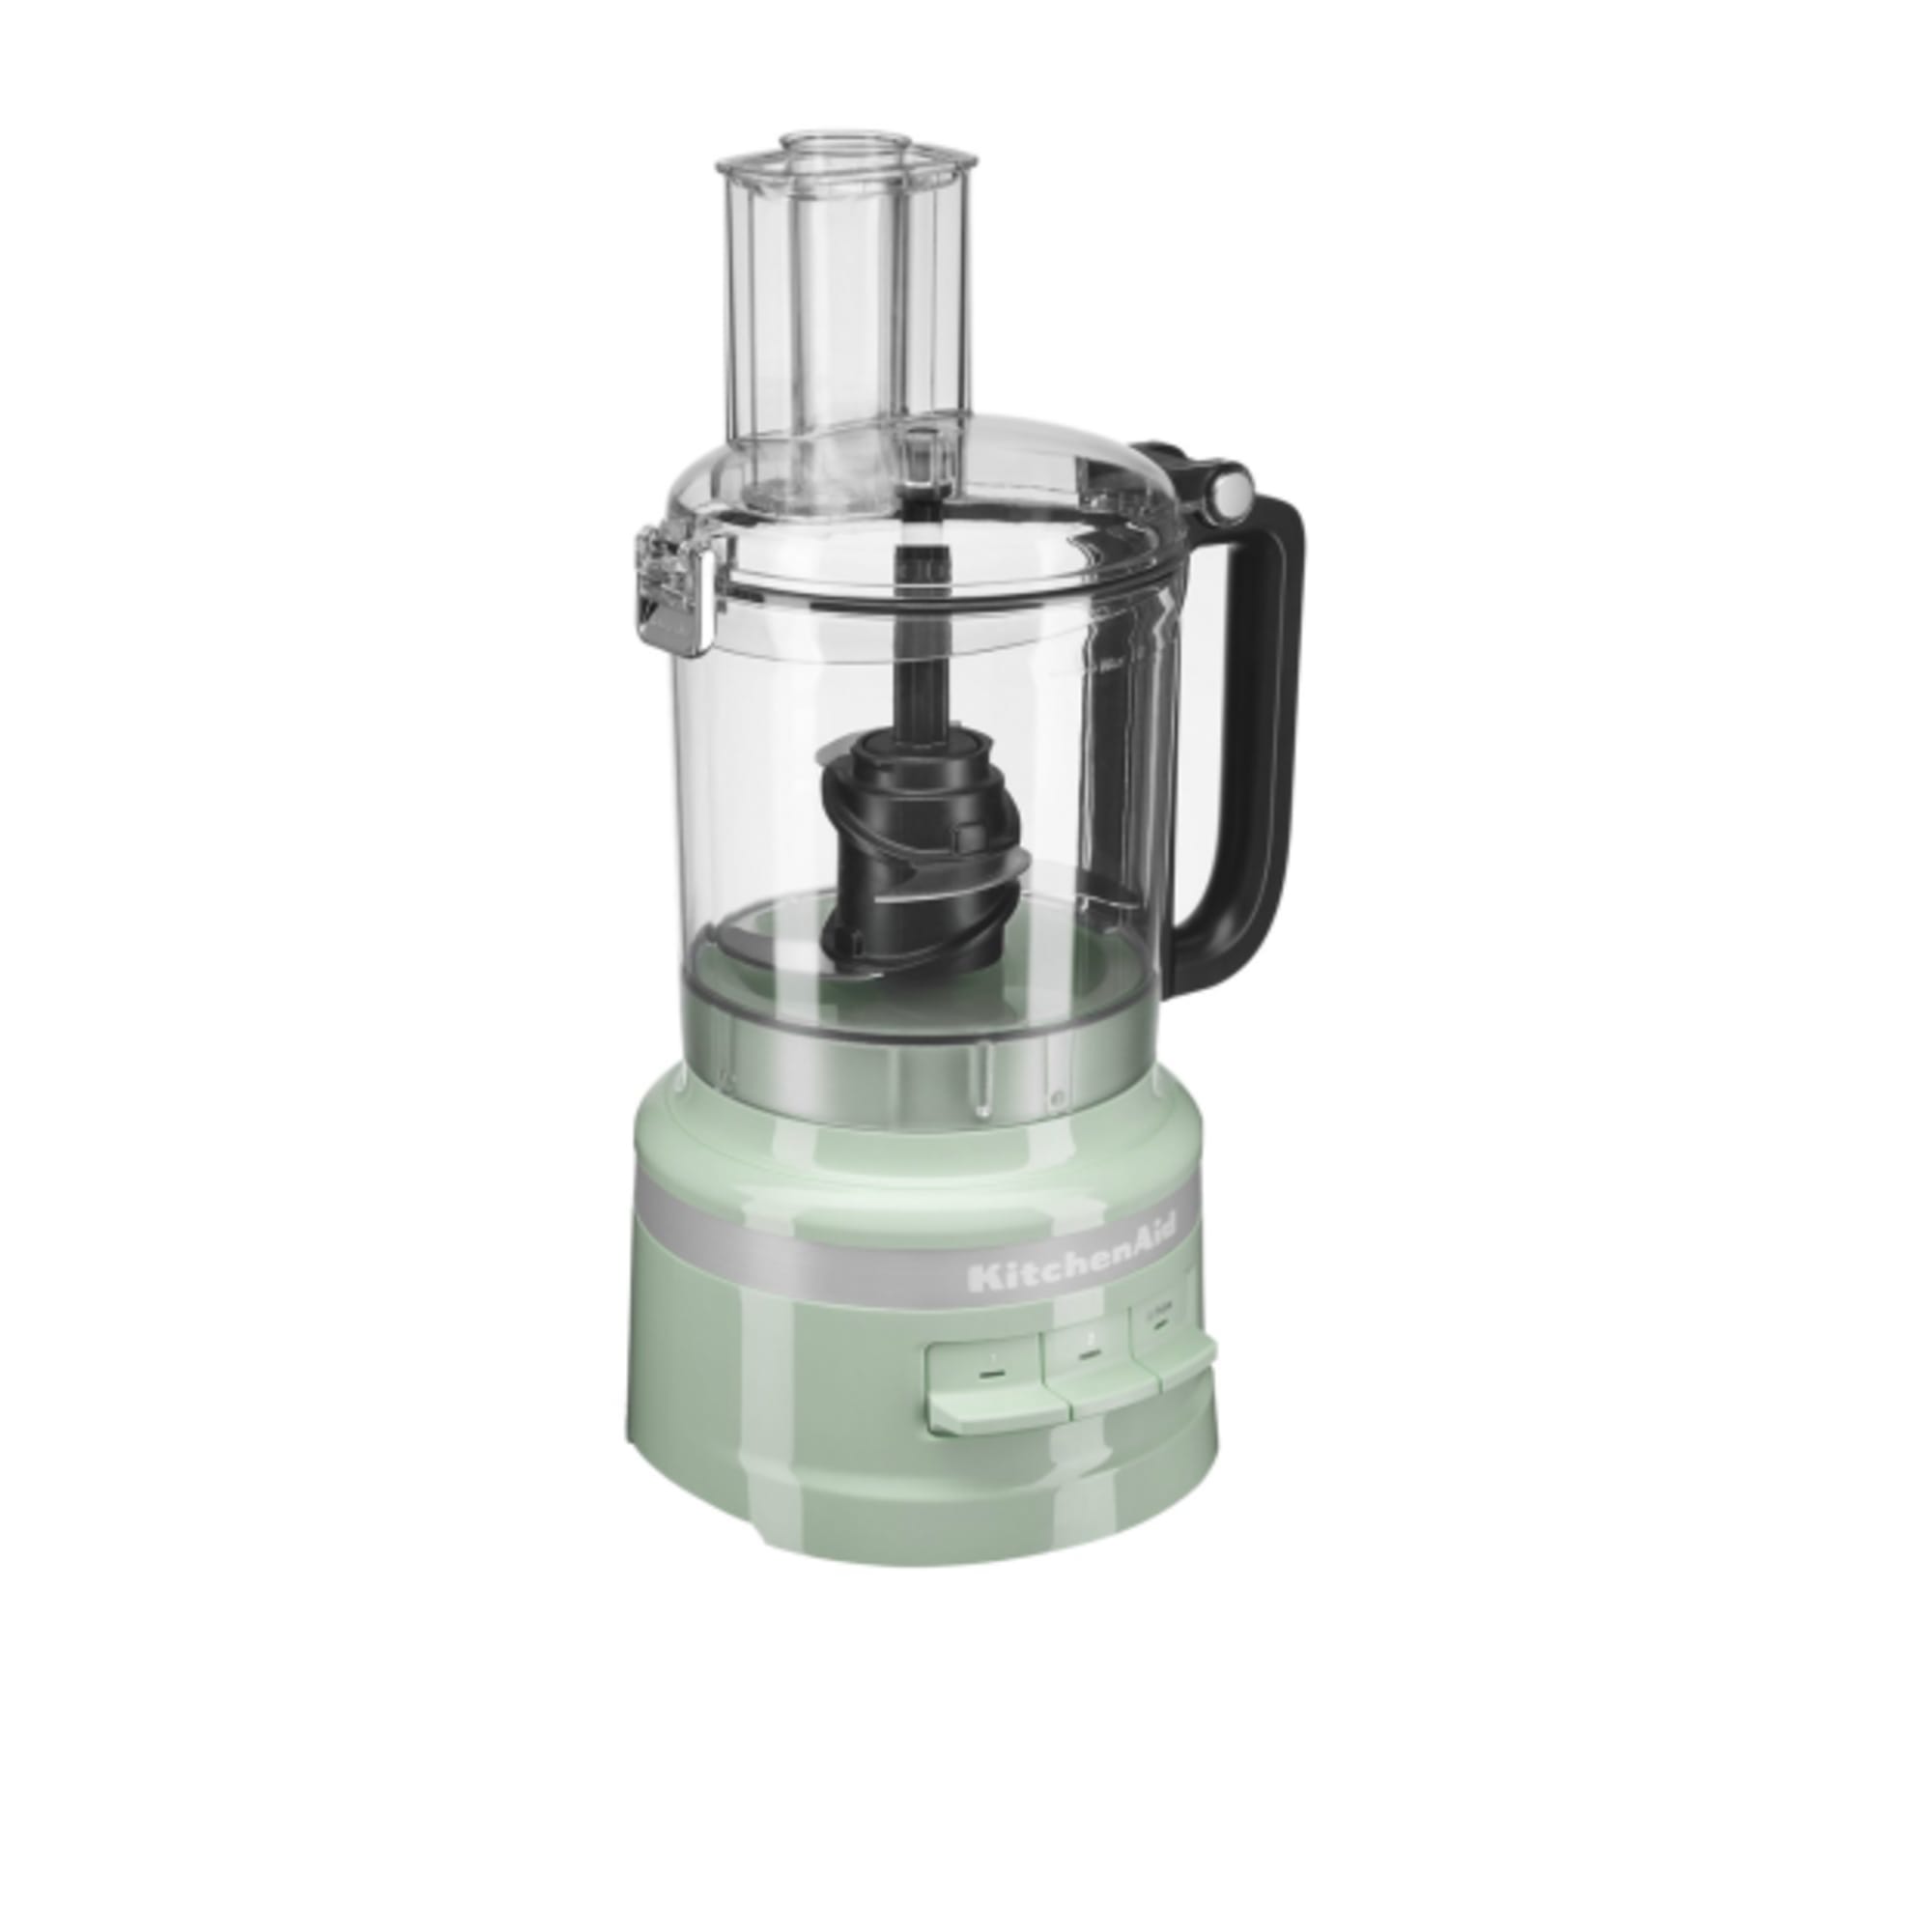 KitchenAid Easy Store 7-Cup Food Processor in White, KFP0718WH at